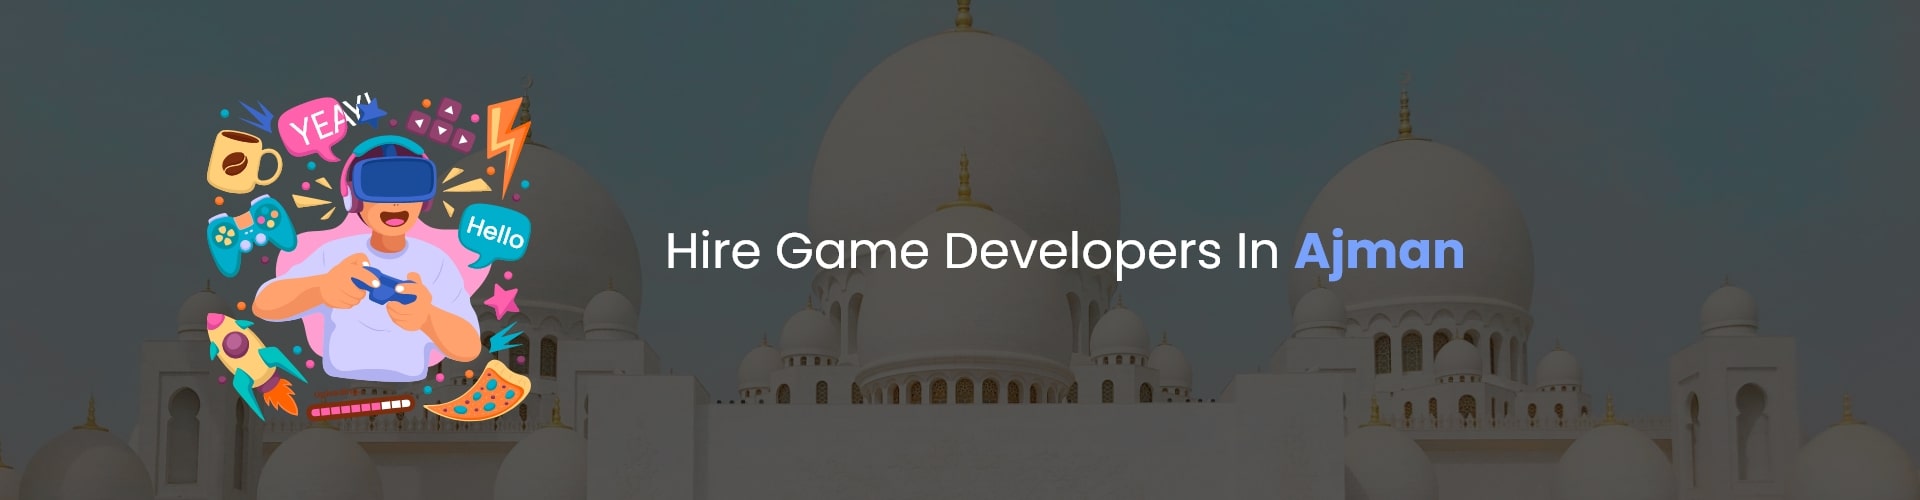 hire game developers in ajman